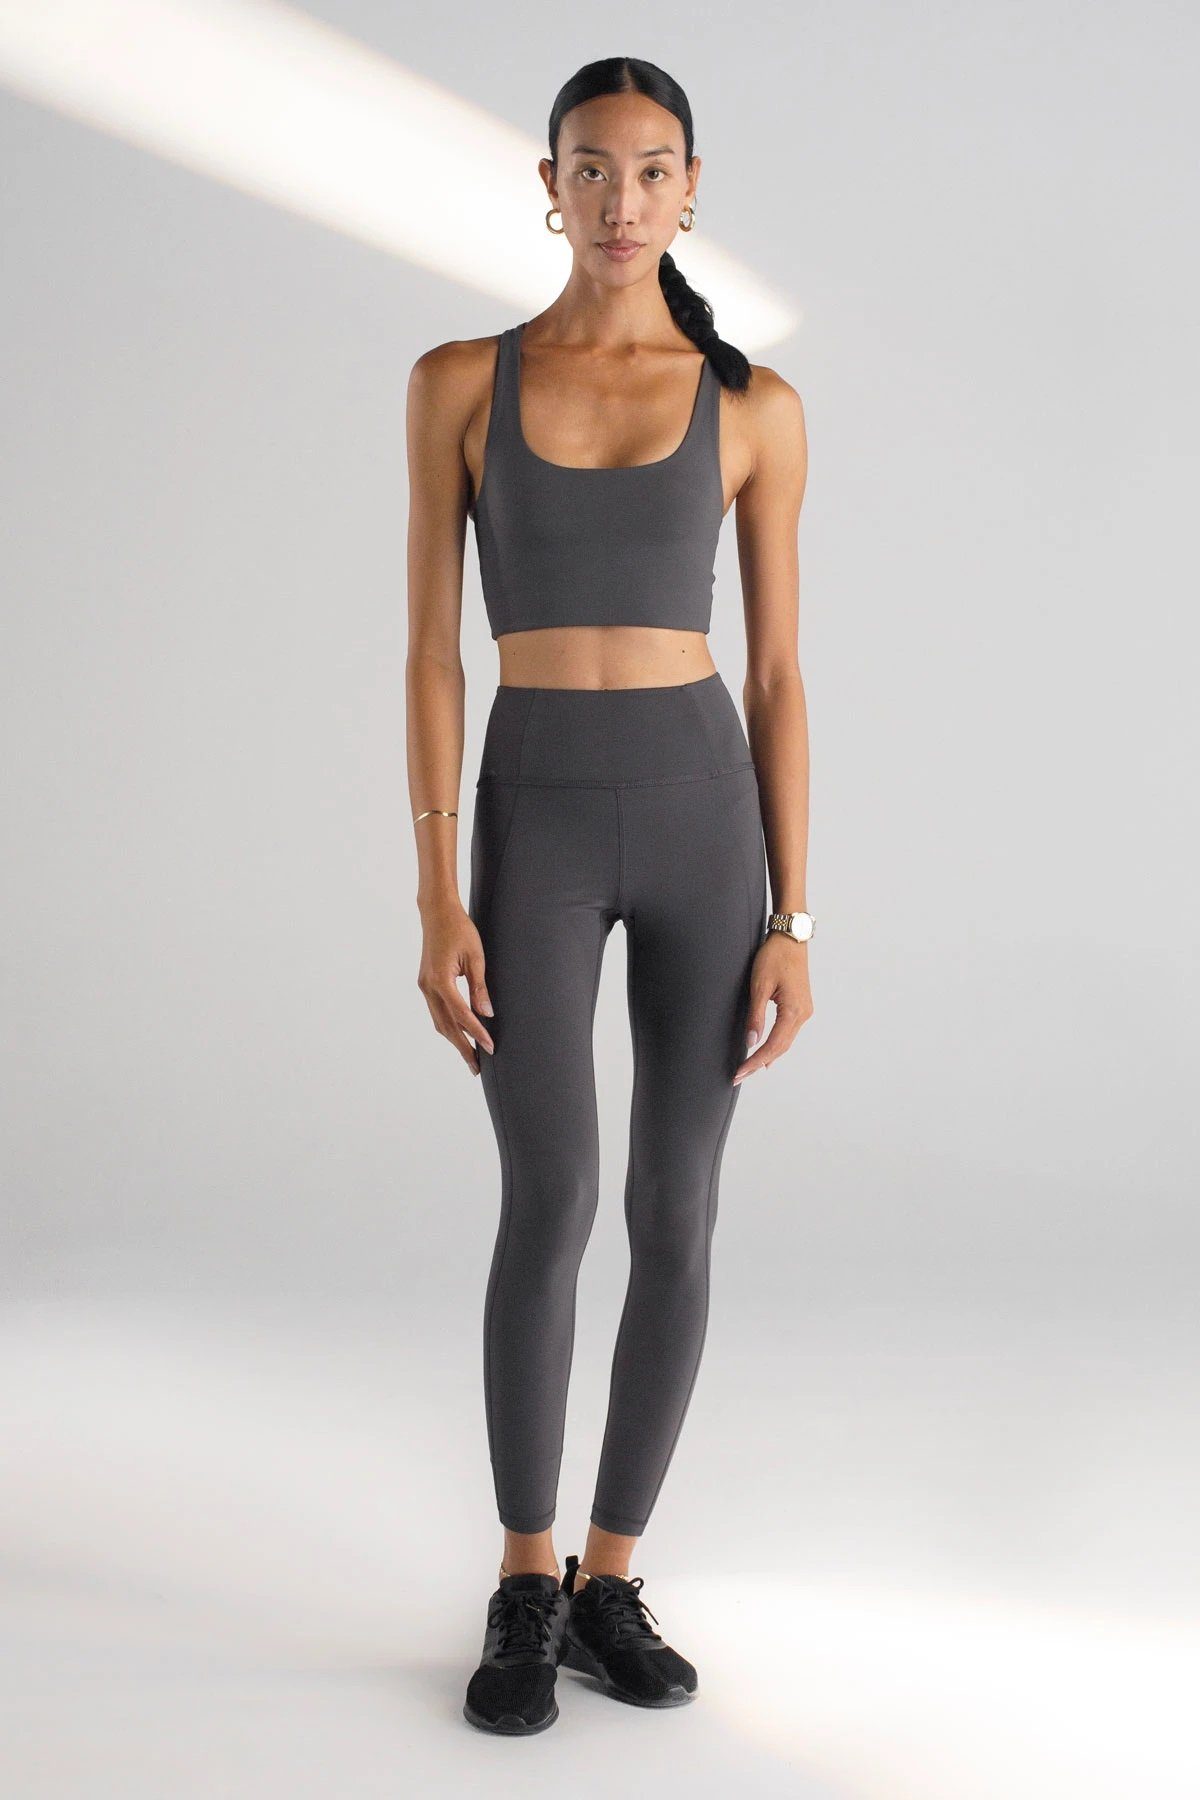 Girlfriend Collective W's Compressive Legging - Normal - Made From Recycled Plastic Bottles Moon Pants